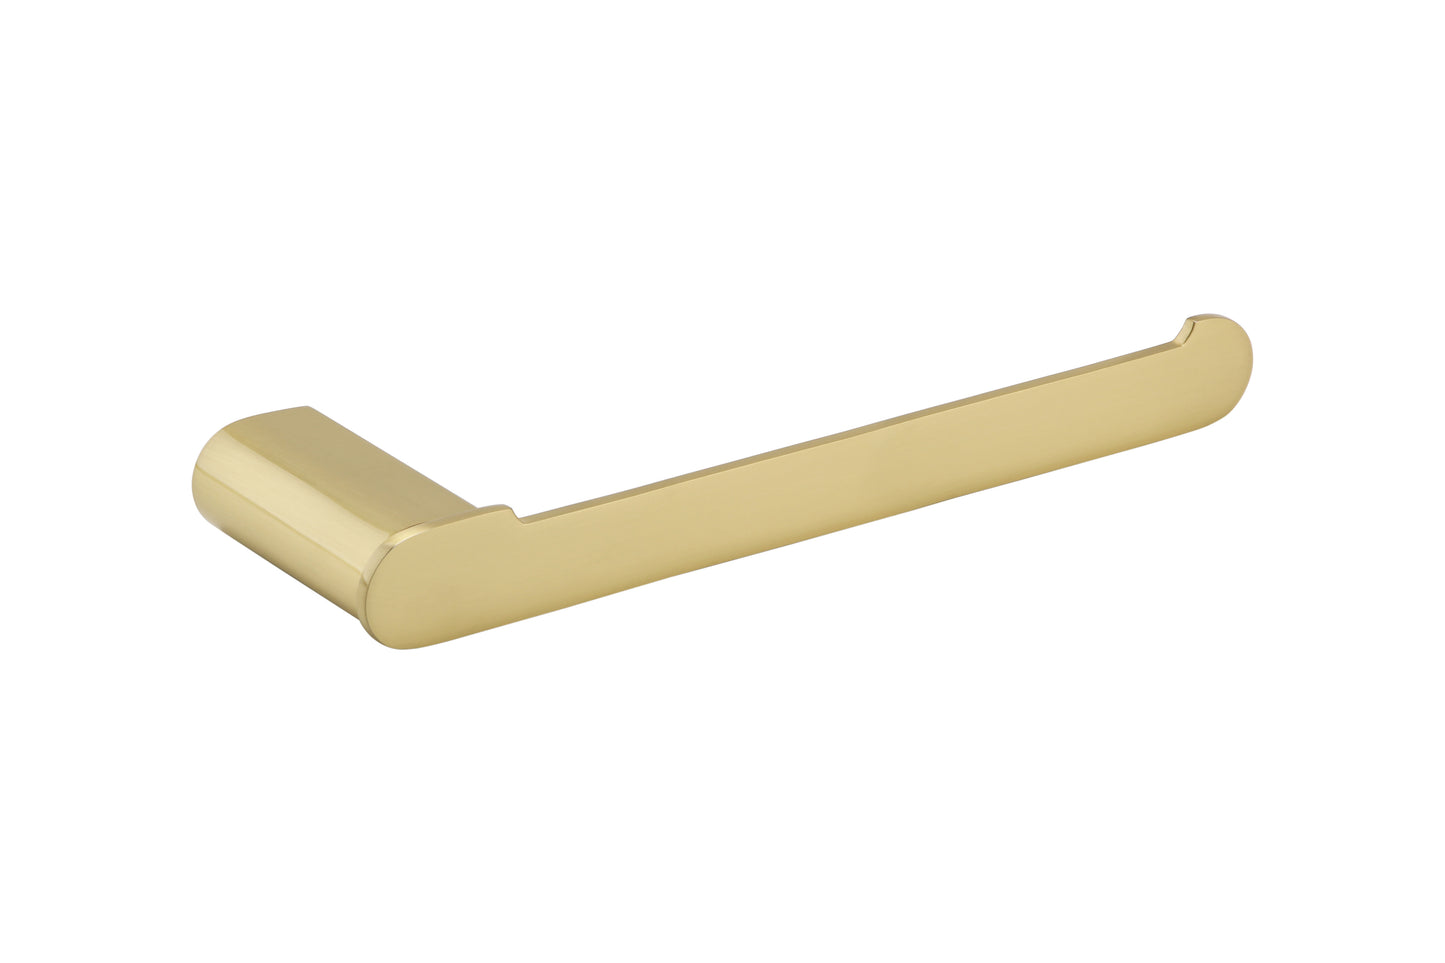 Vares-A Bathrooms Hand Towel Ring  - Brushed Brass